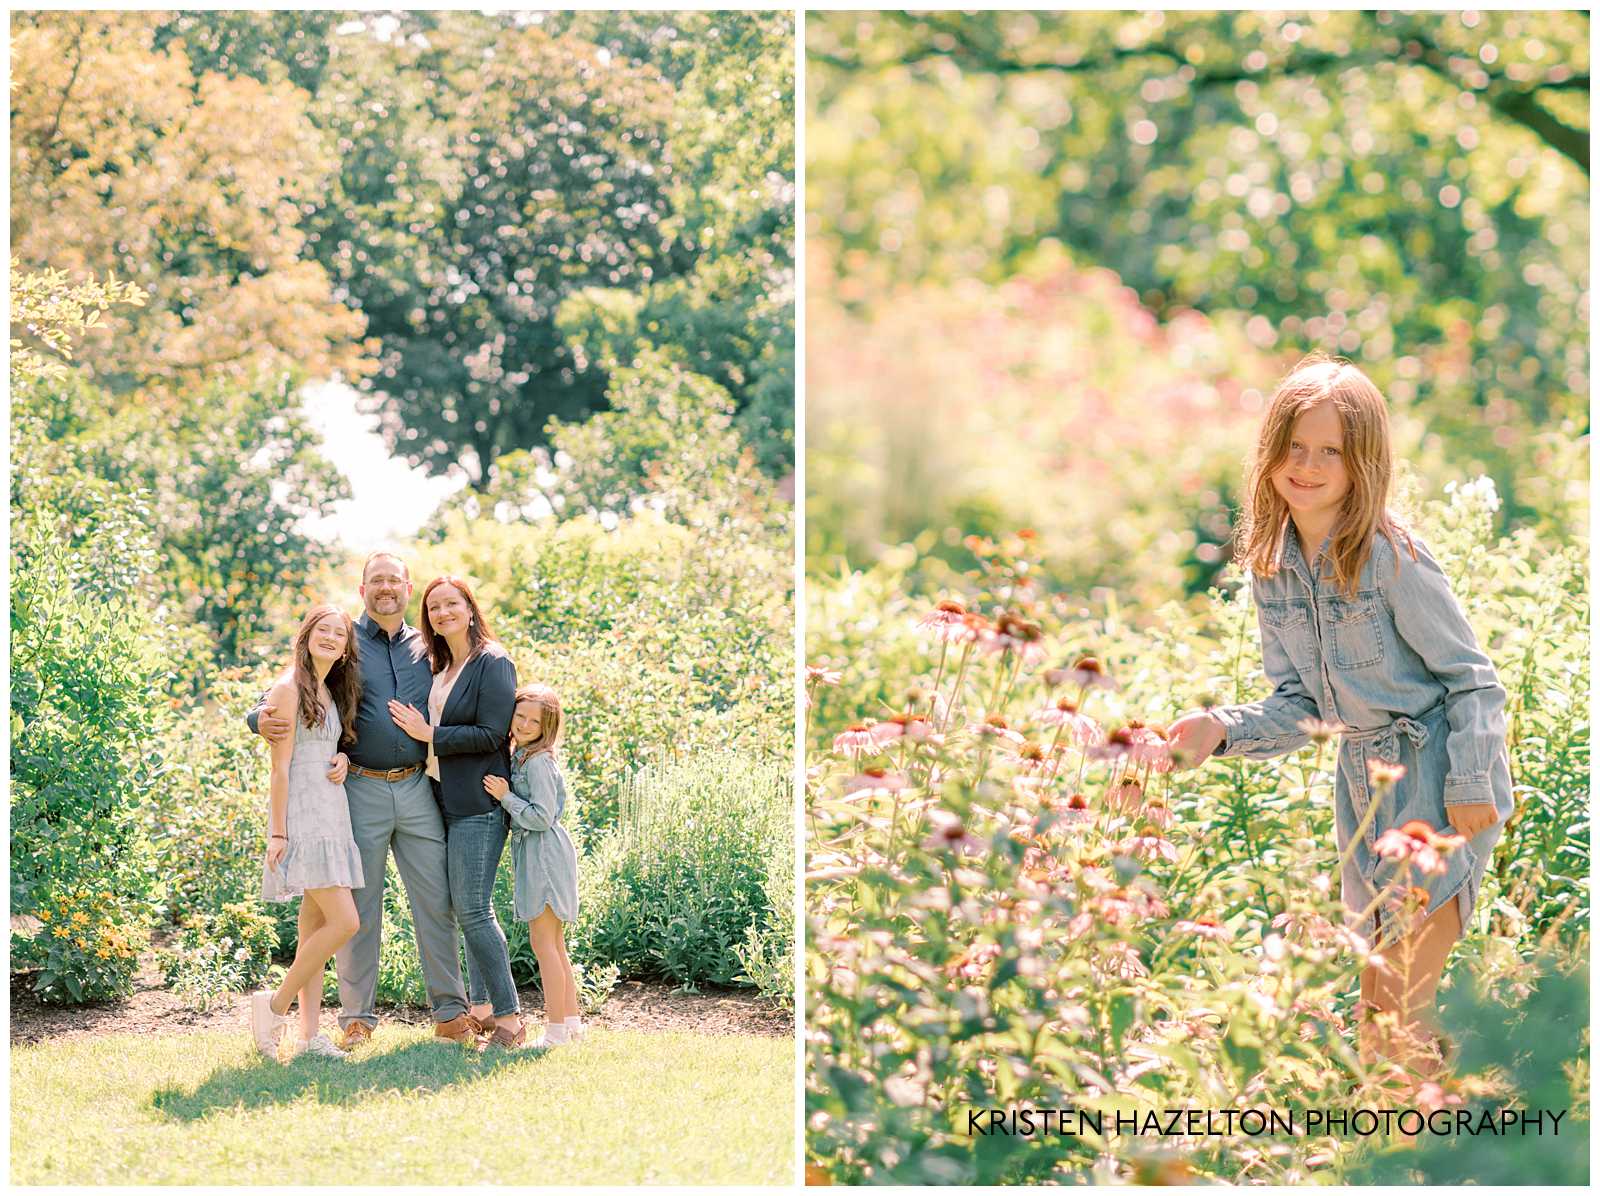 Summer family photos in a garden with pink flowers